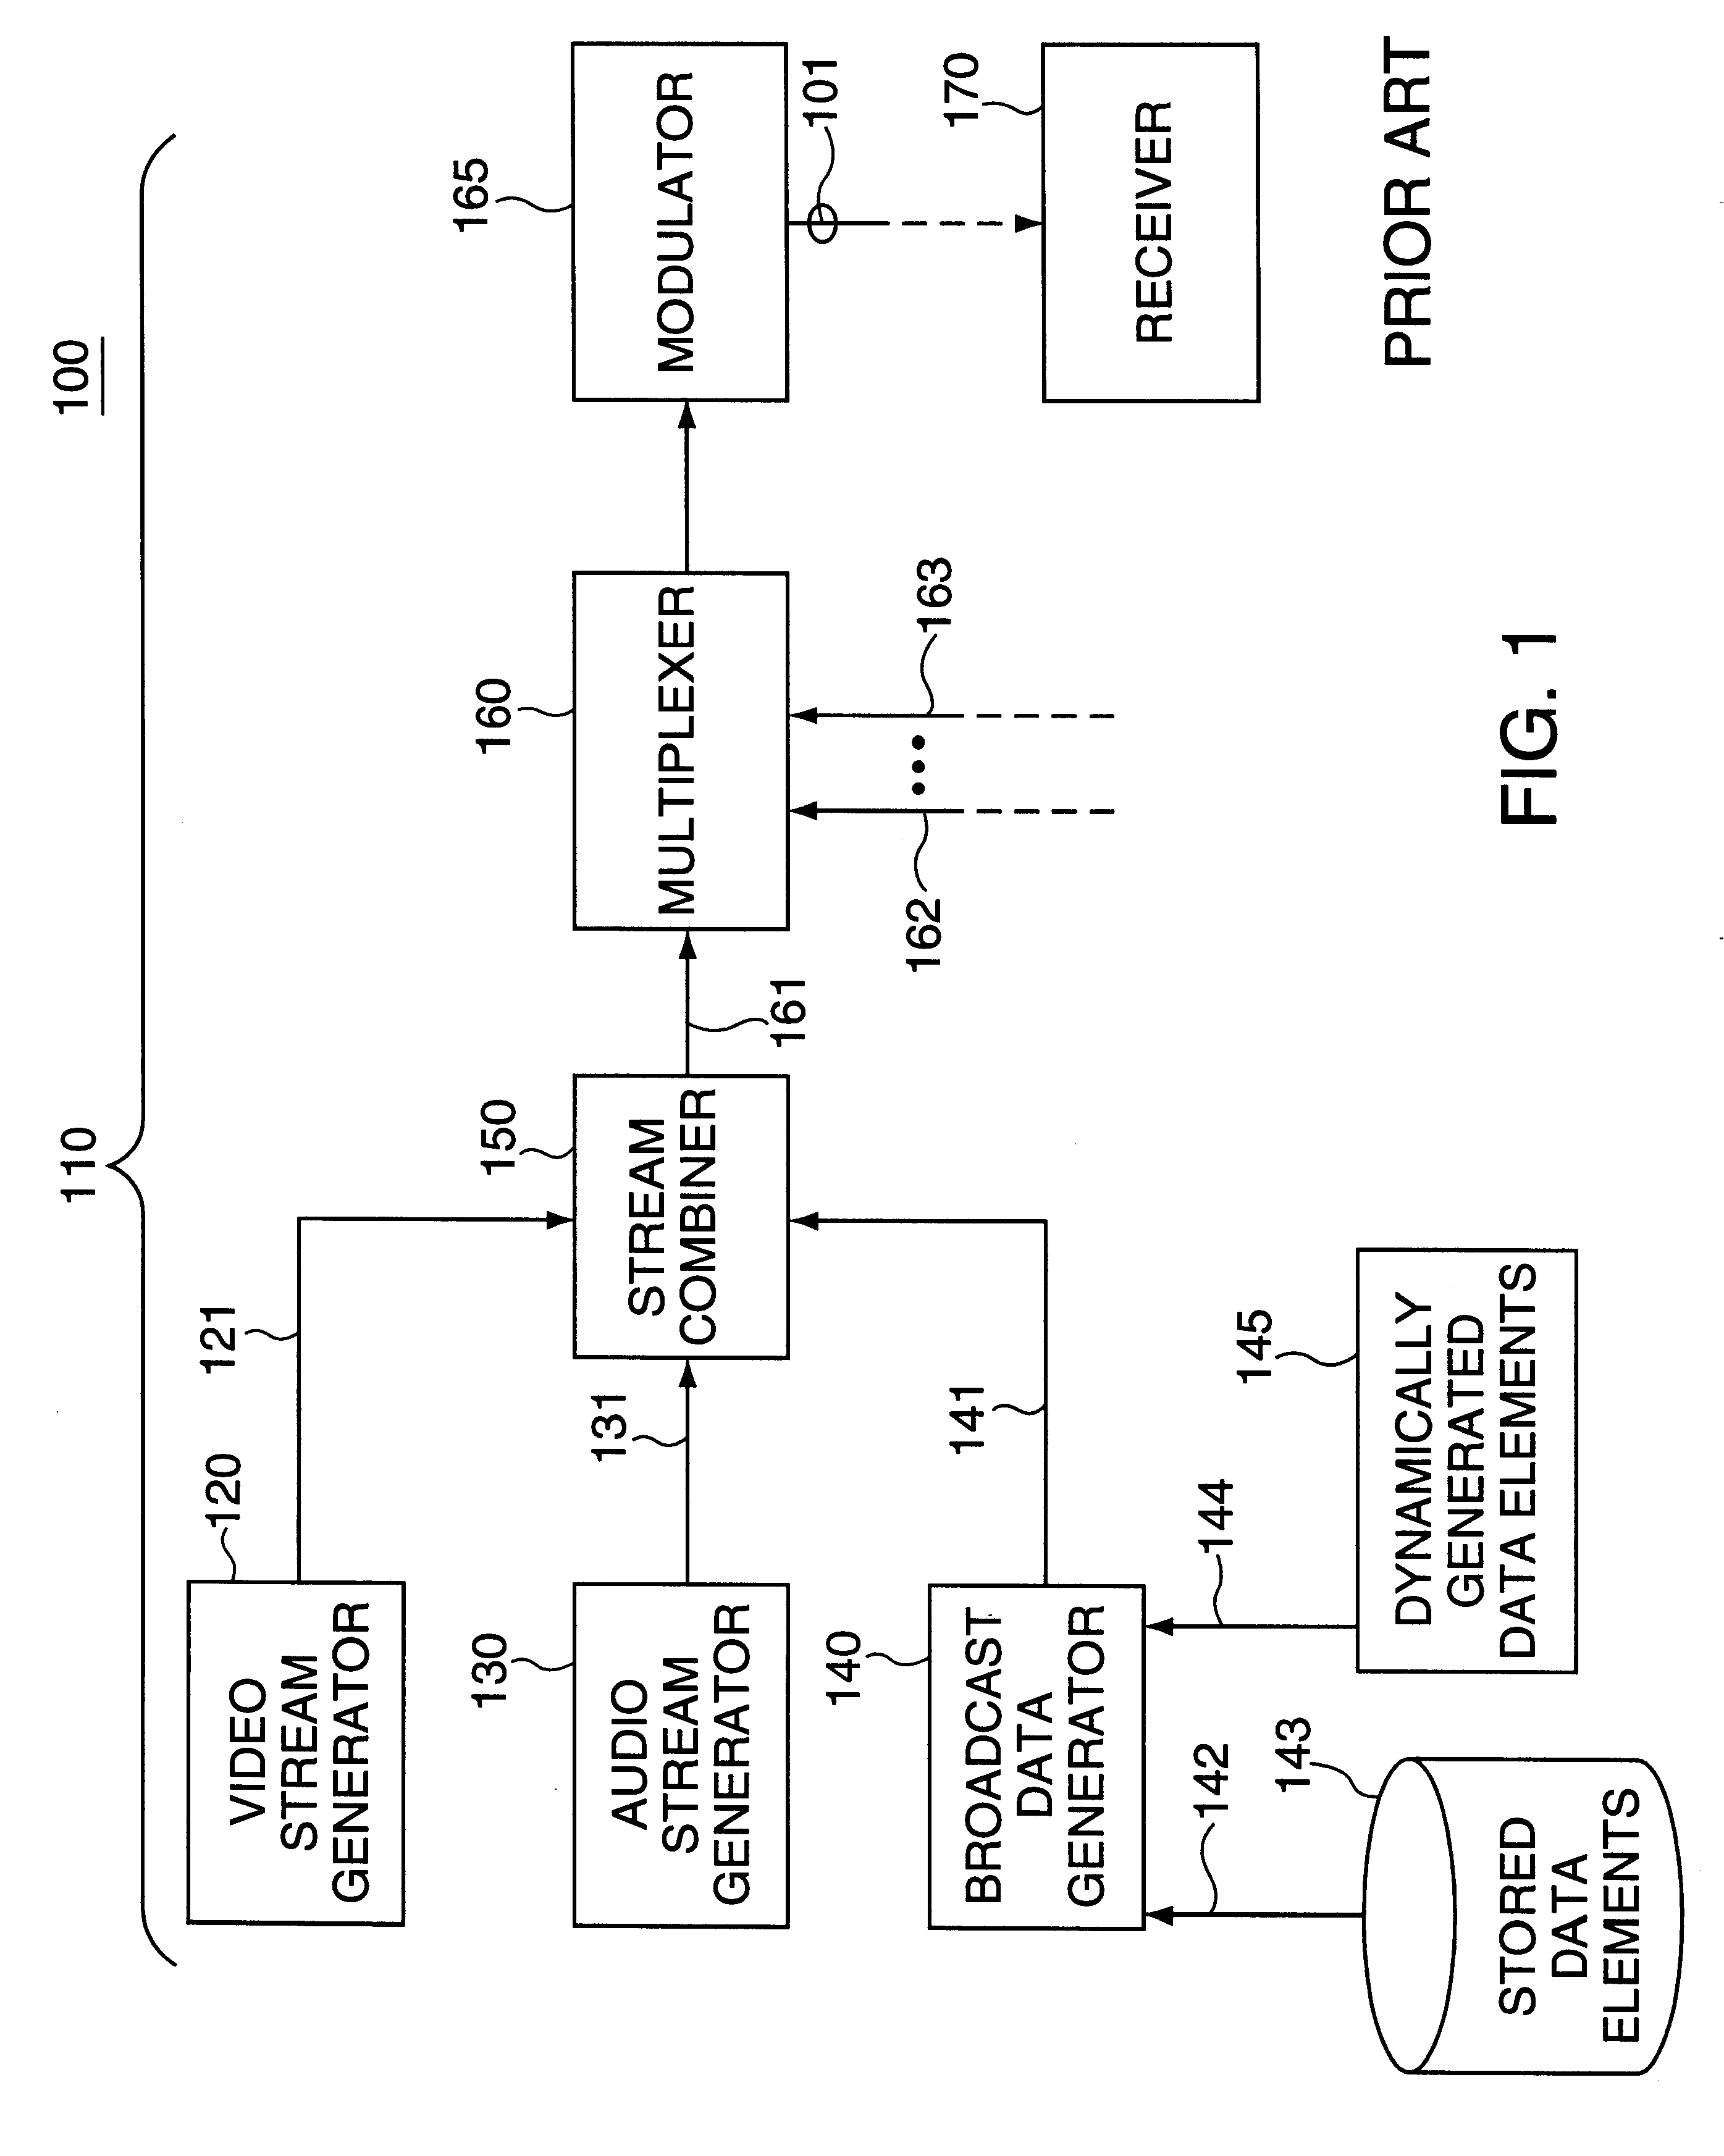 Methods and apparatus for recording video files and for generating a table listing the recorded files and links to additional information